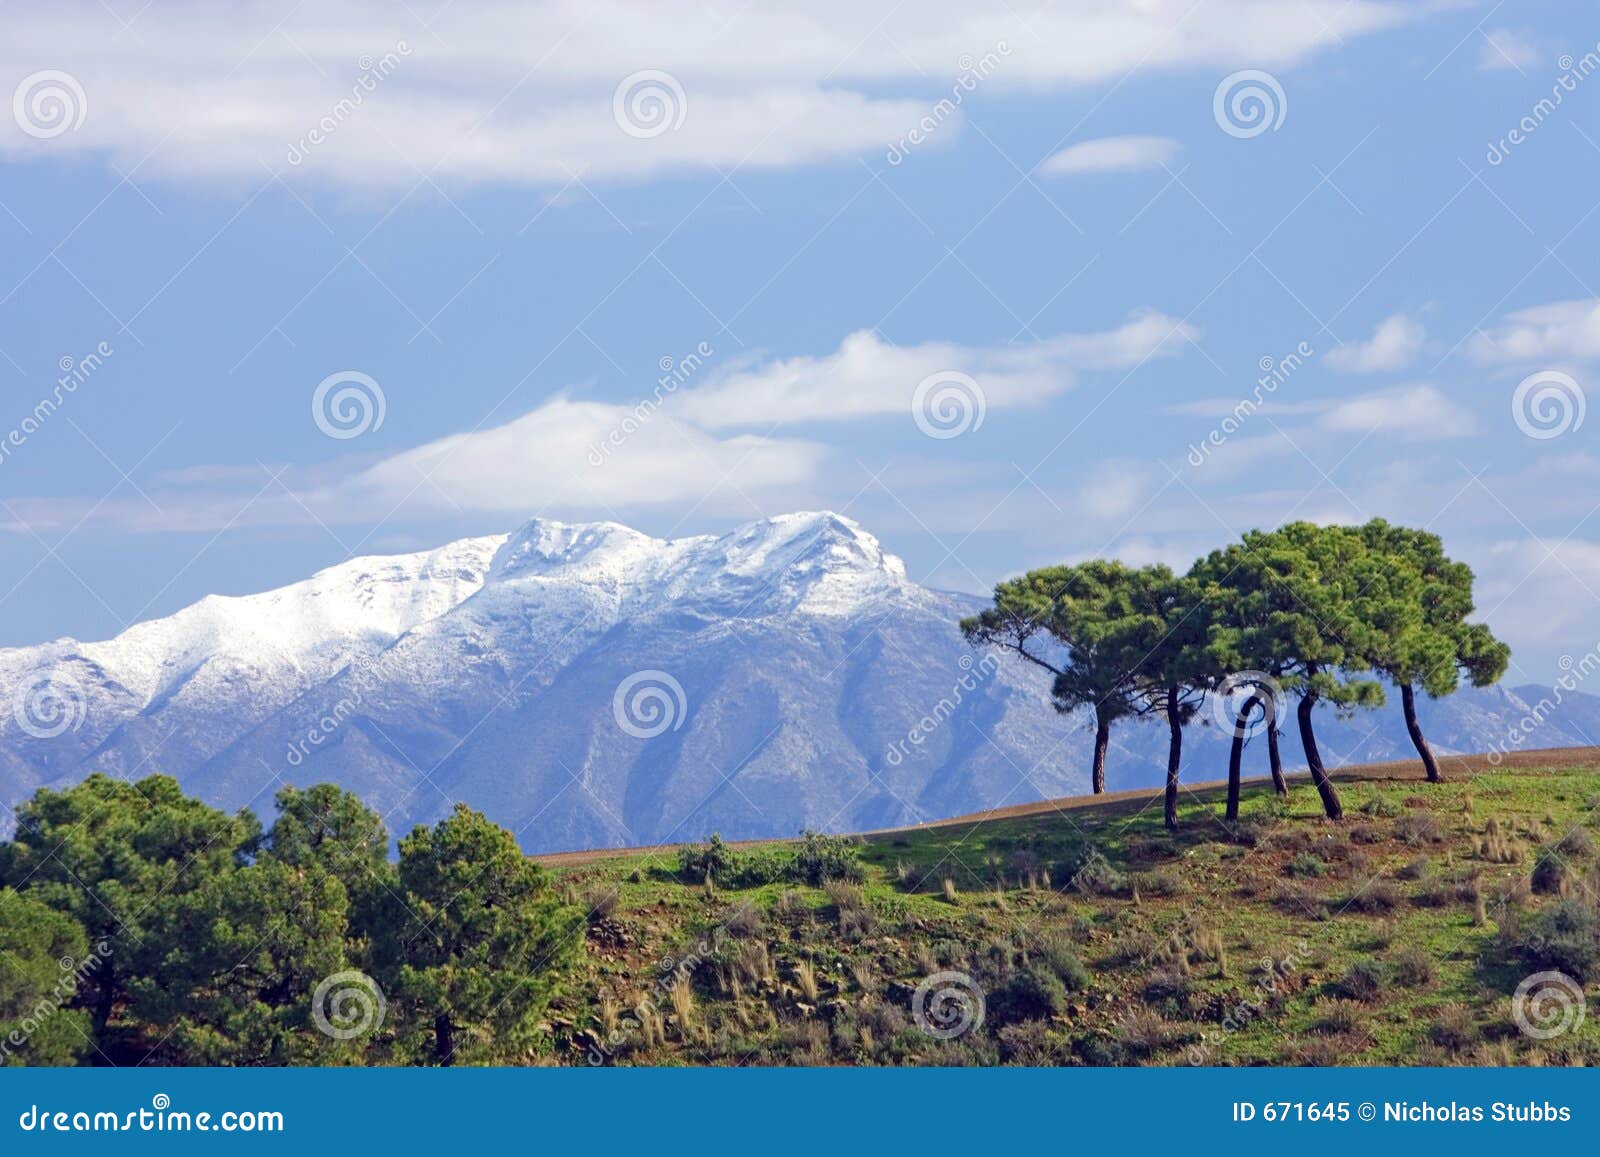 snowcapped mountains and trees in spain